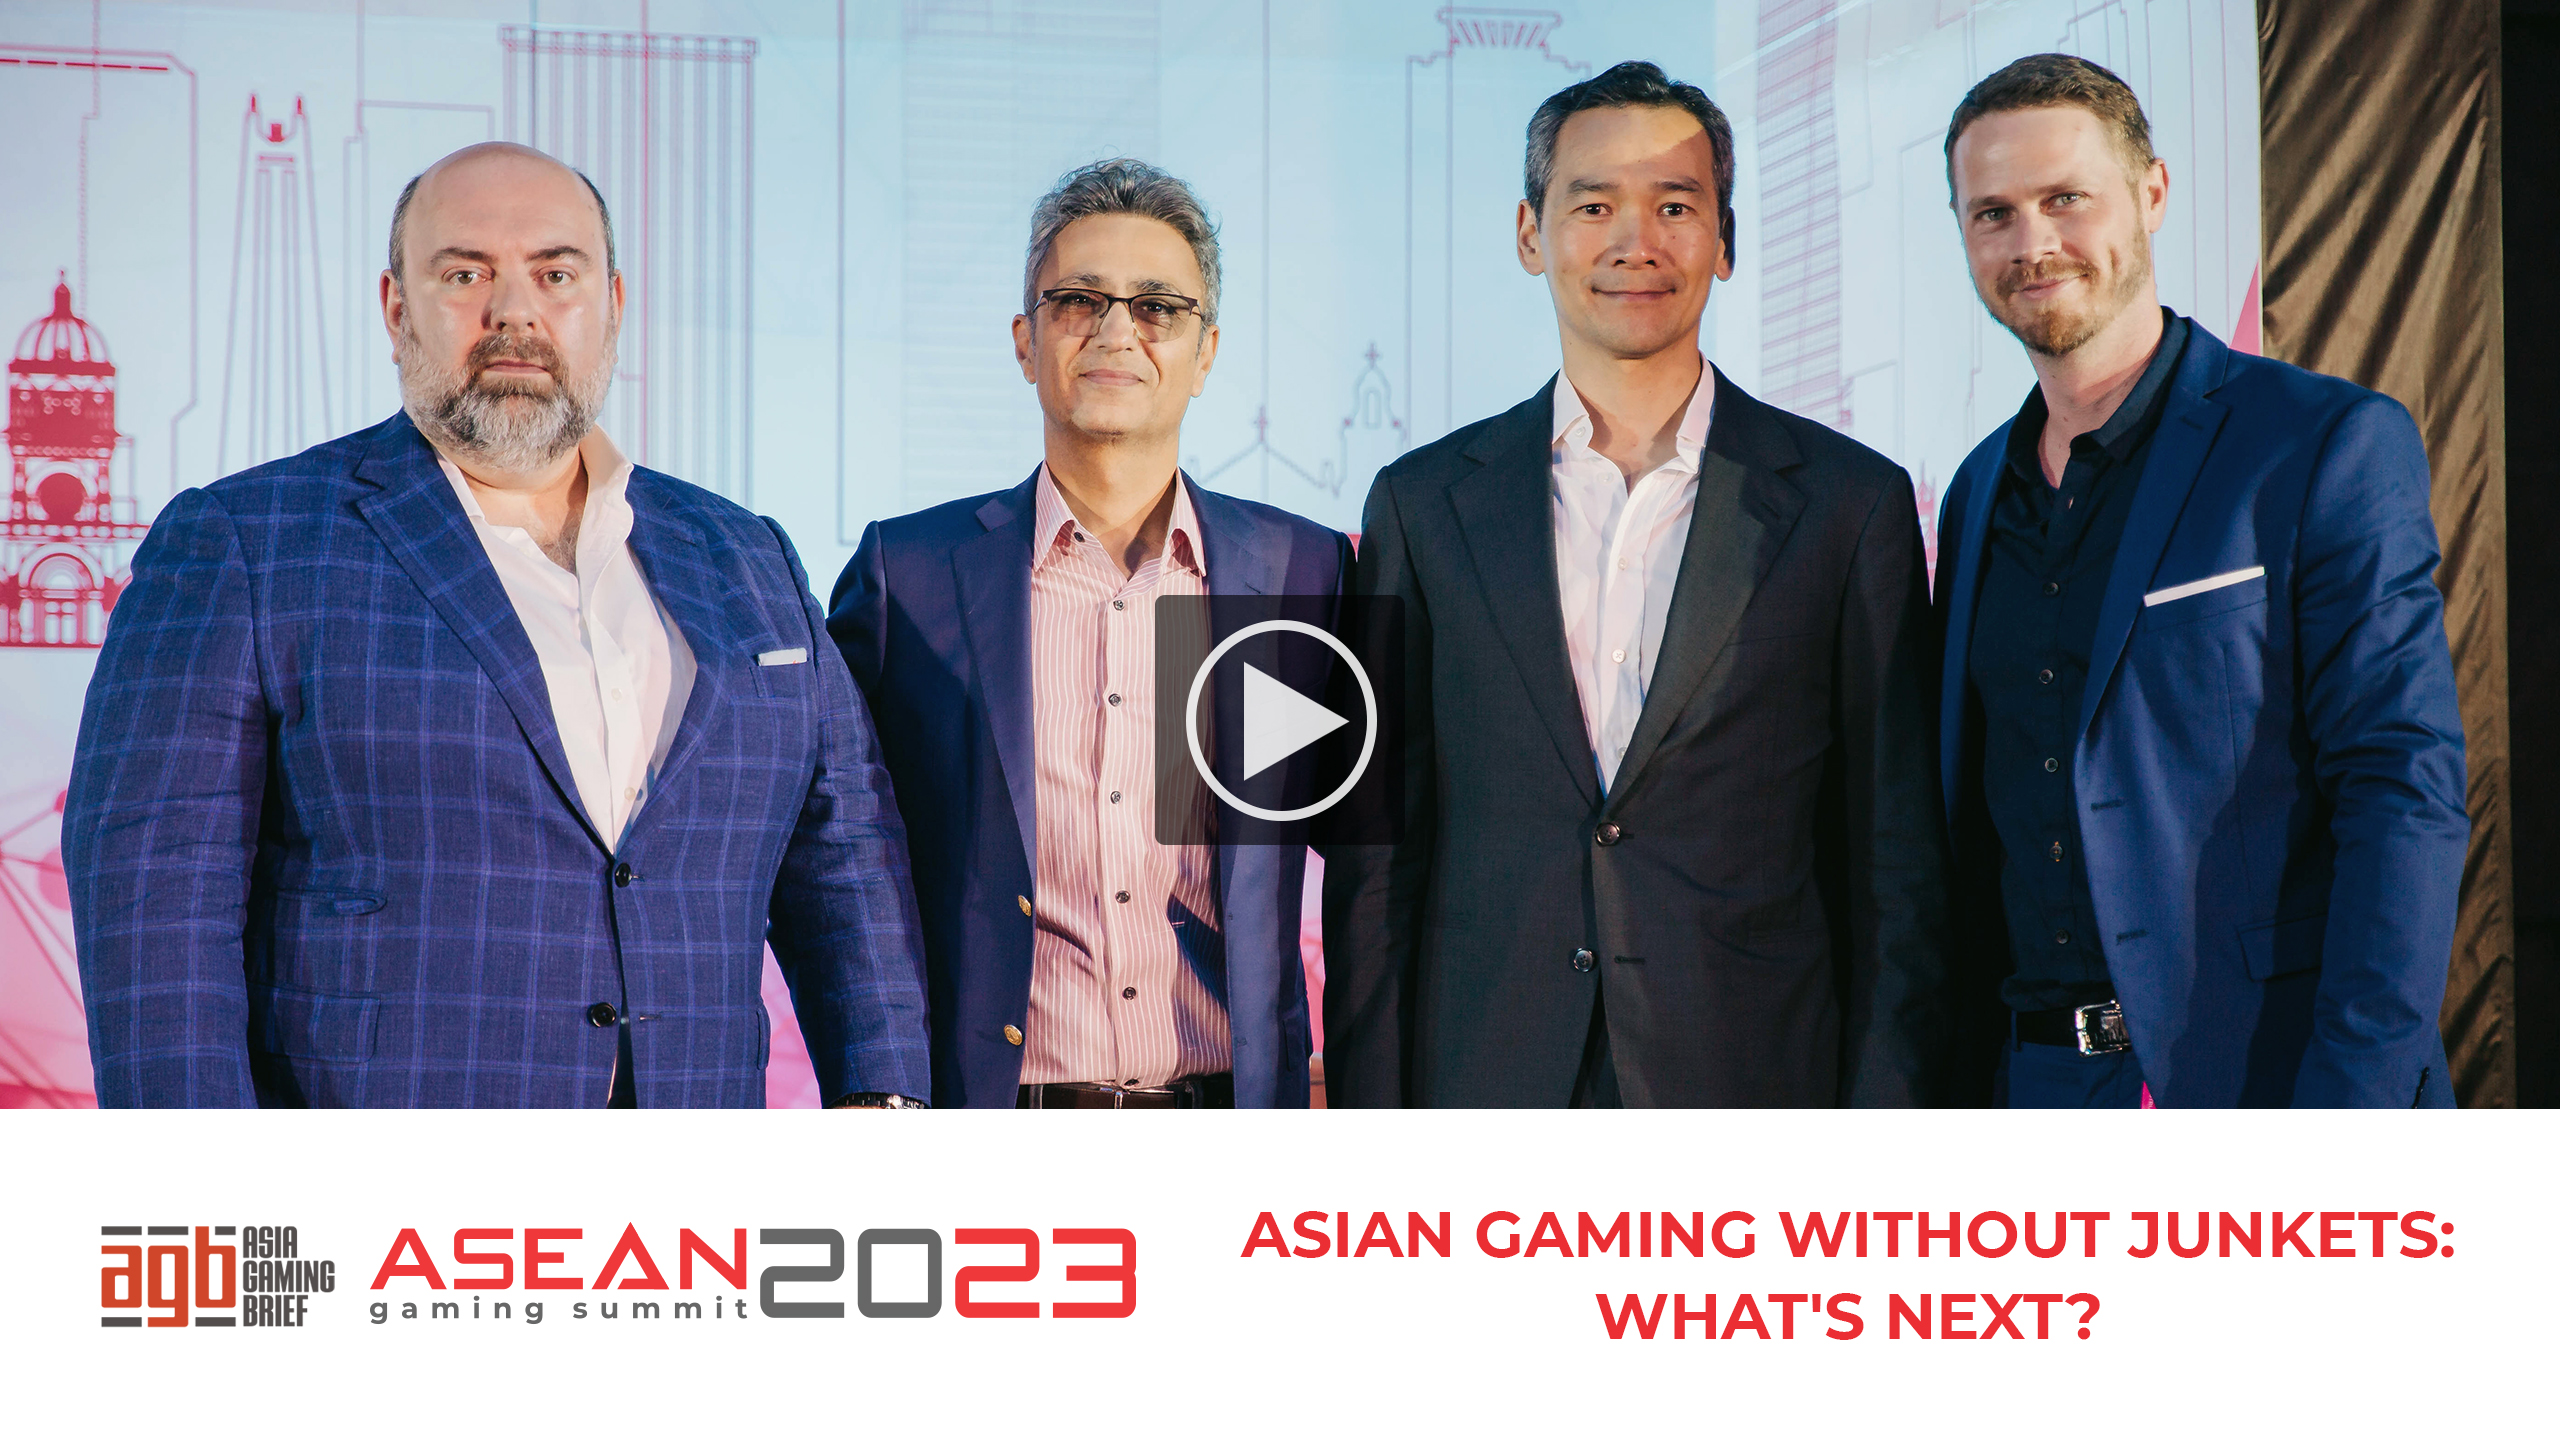 ASEAN Gaming Summit, Macau Without Junkets, asia gaming ebrief